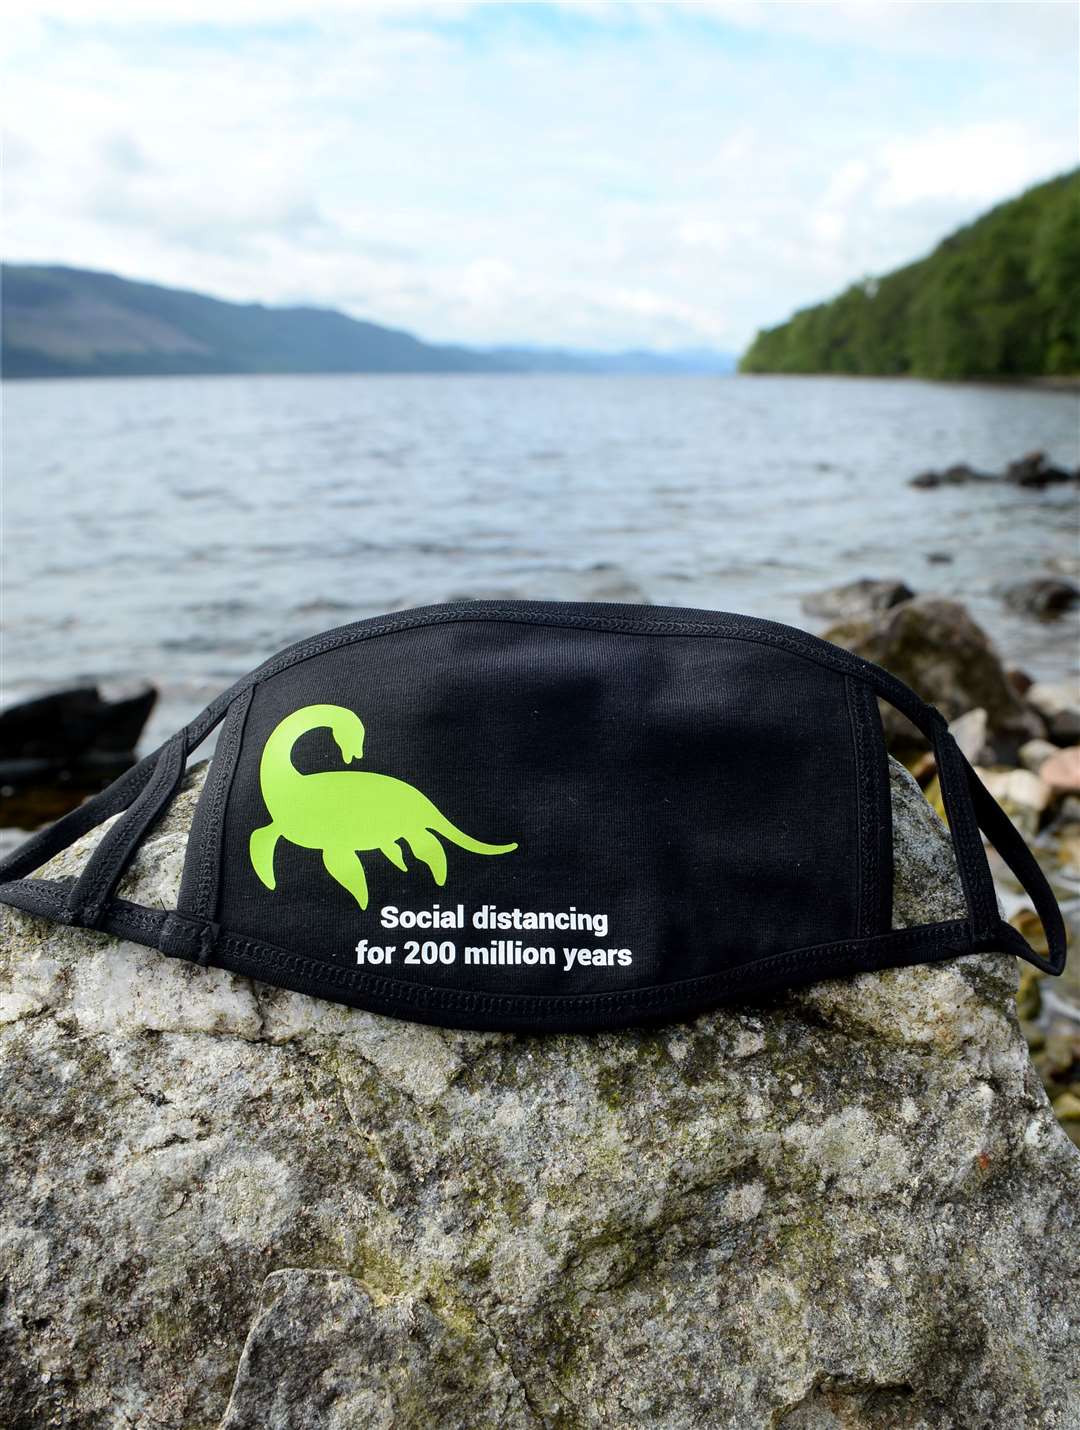 Willie Cameron with his Nessie facemask on banks of Loch Ness..Picture: Gary Anthony..